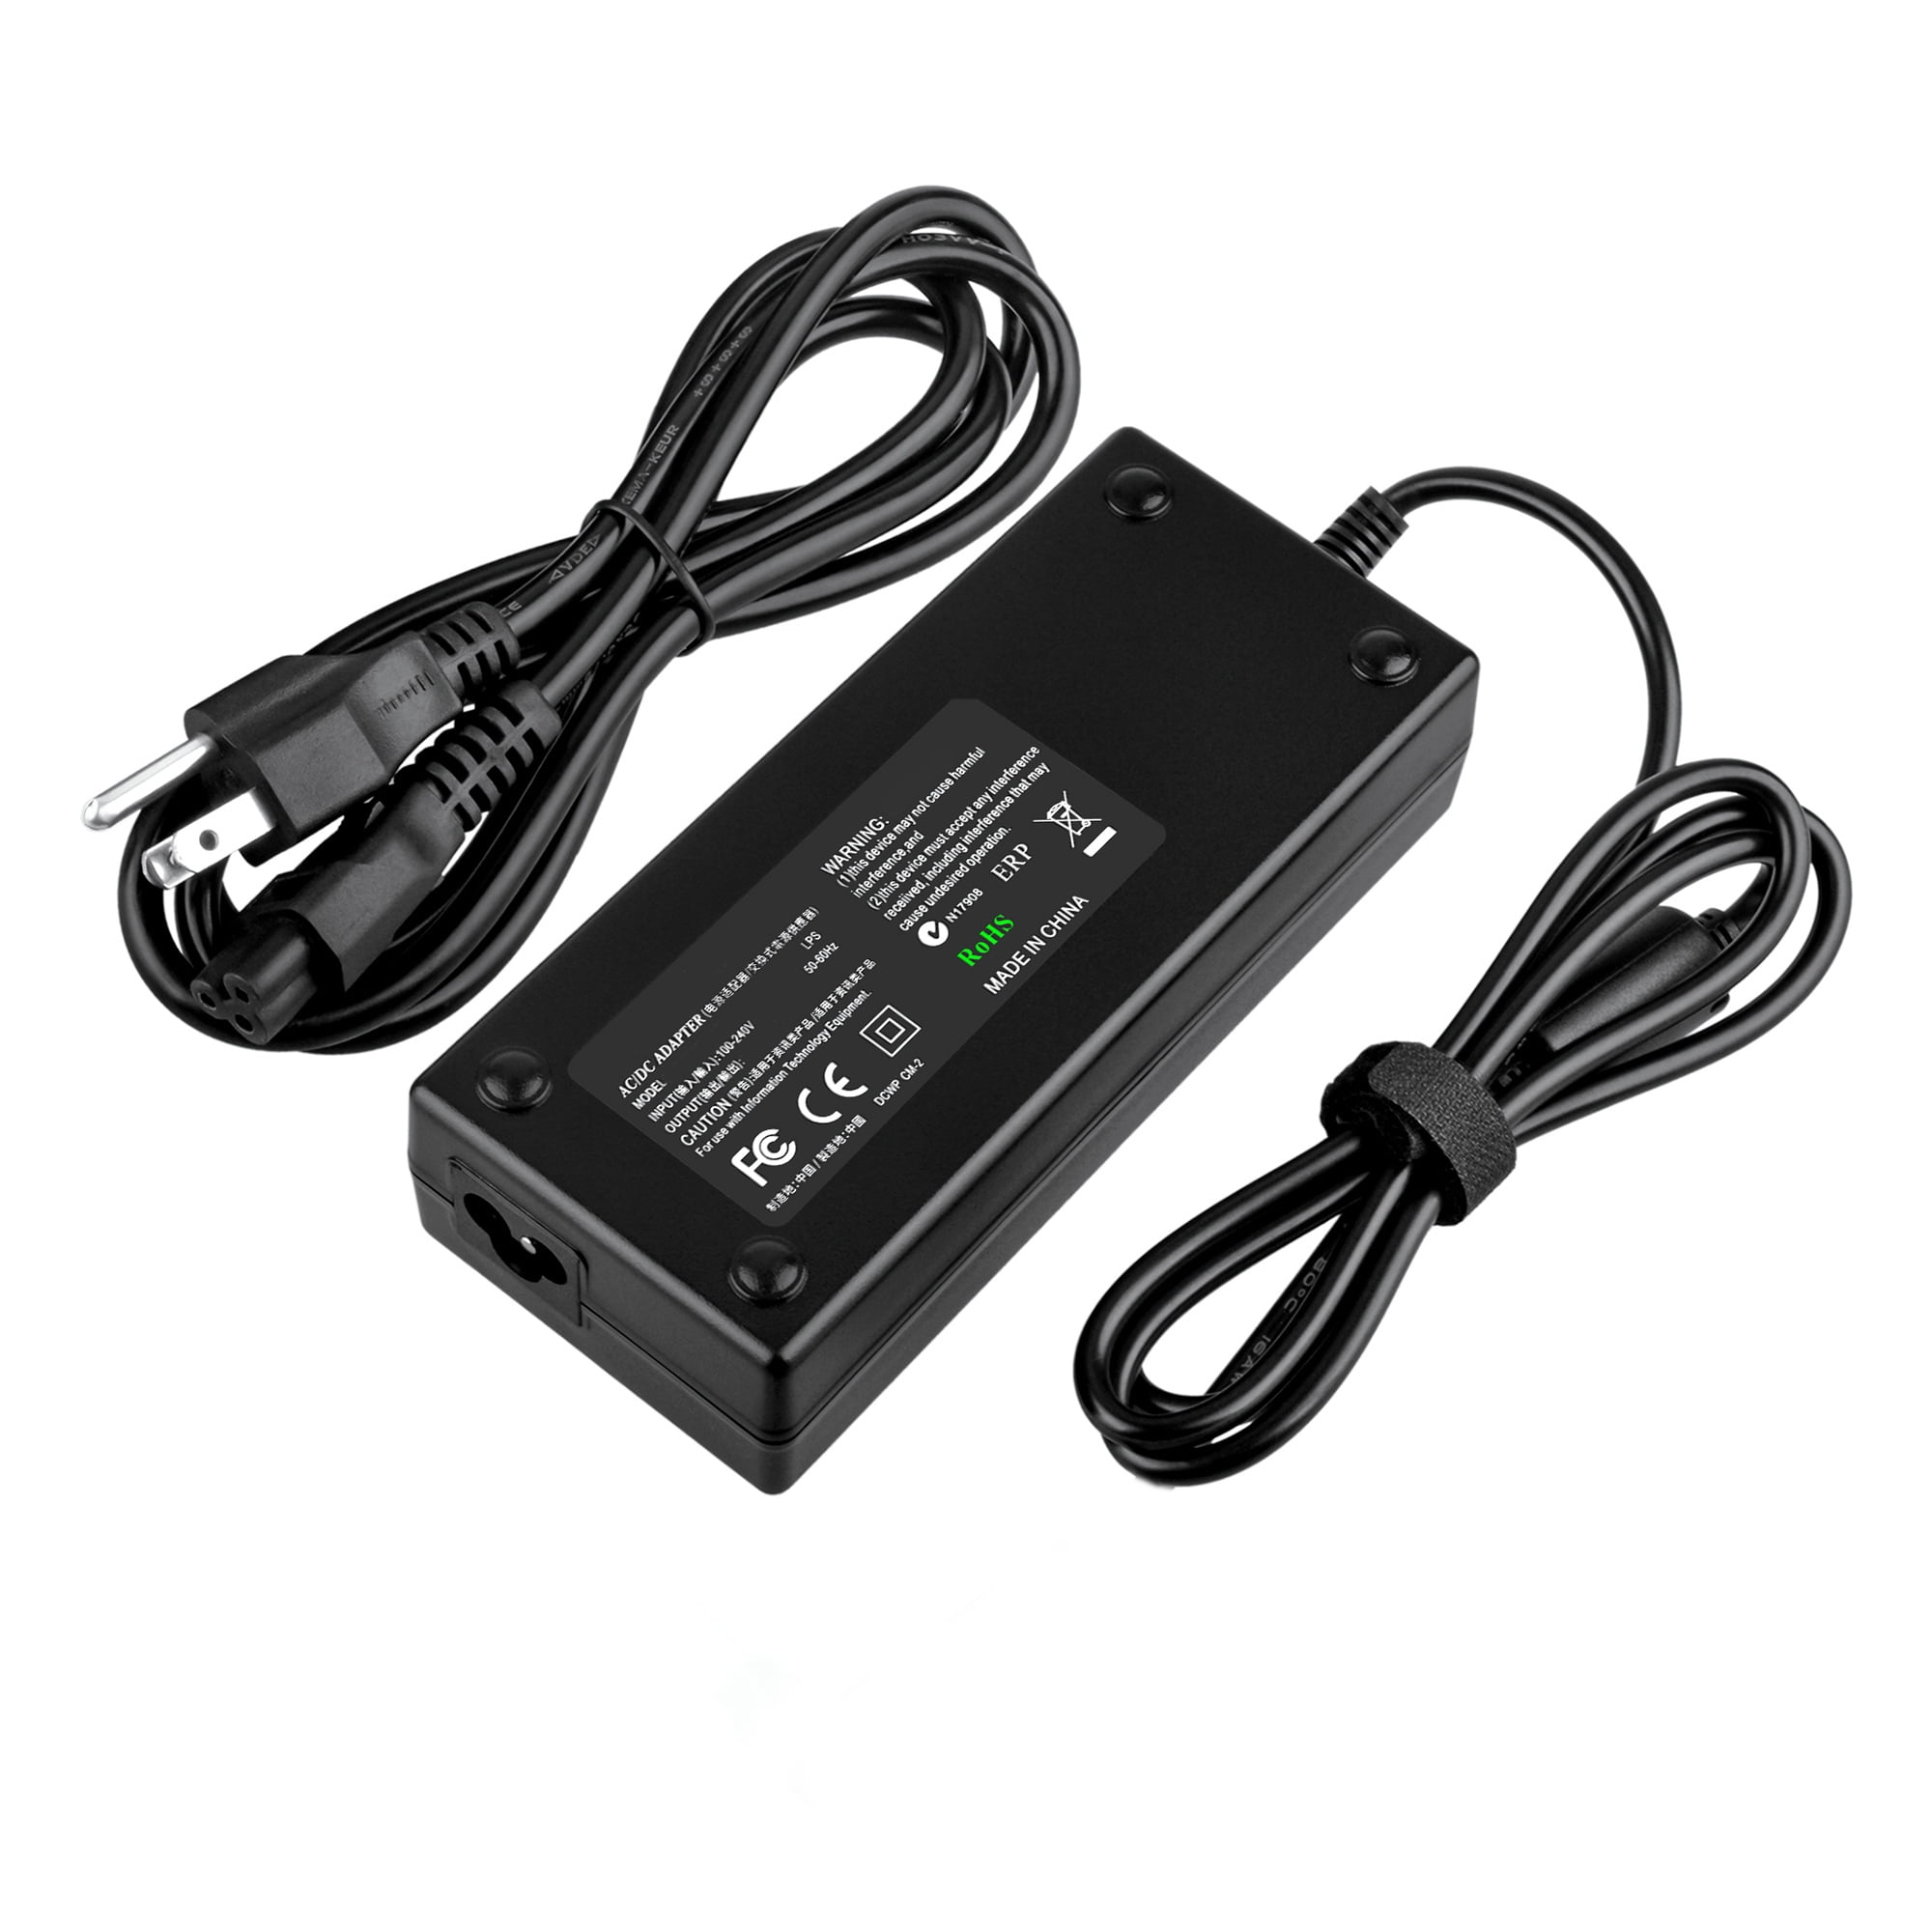 CJP-Geek 180W Laptop Charger AC Power replacement for ASUS ROG G752 Series ROG G752VY G752VL - Walmart.com